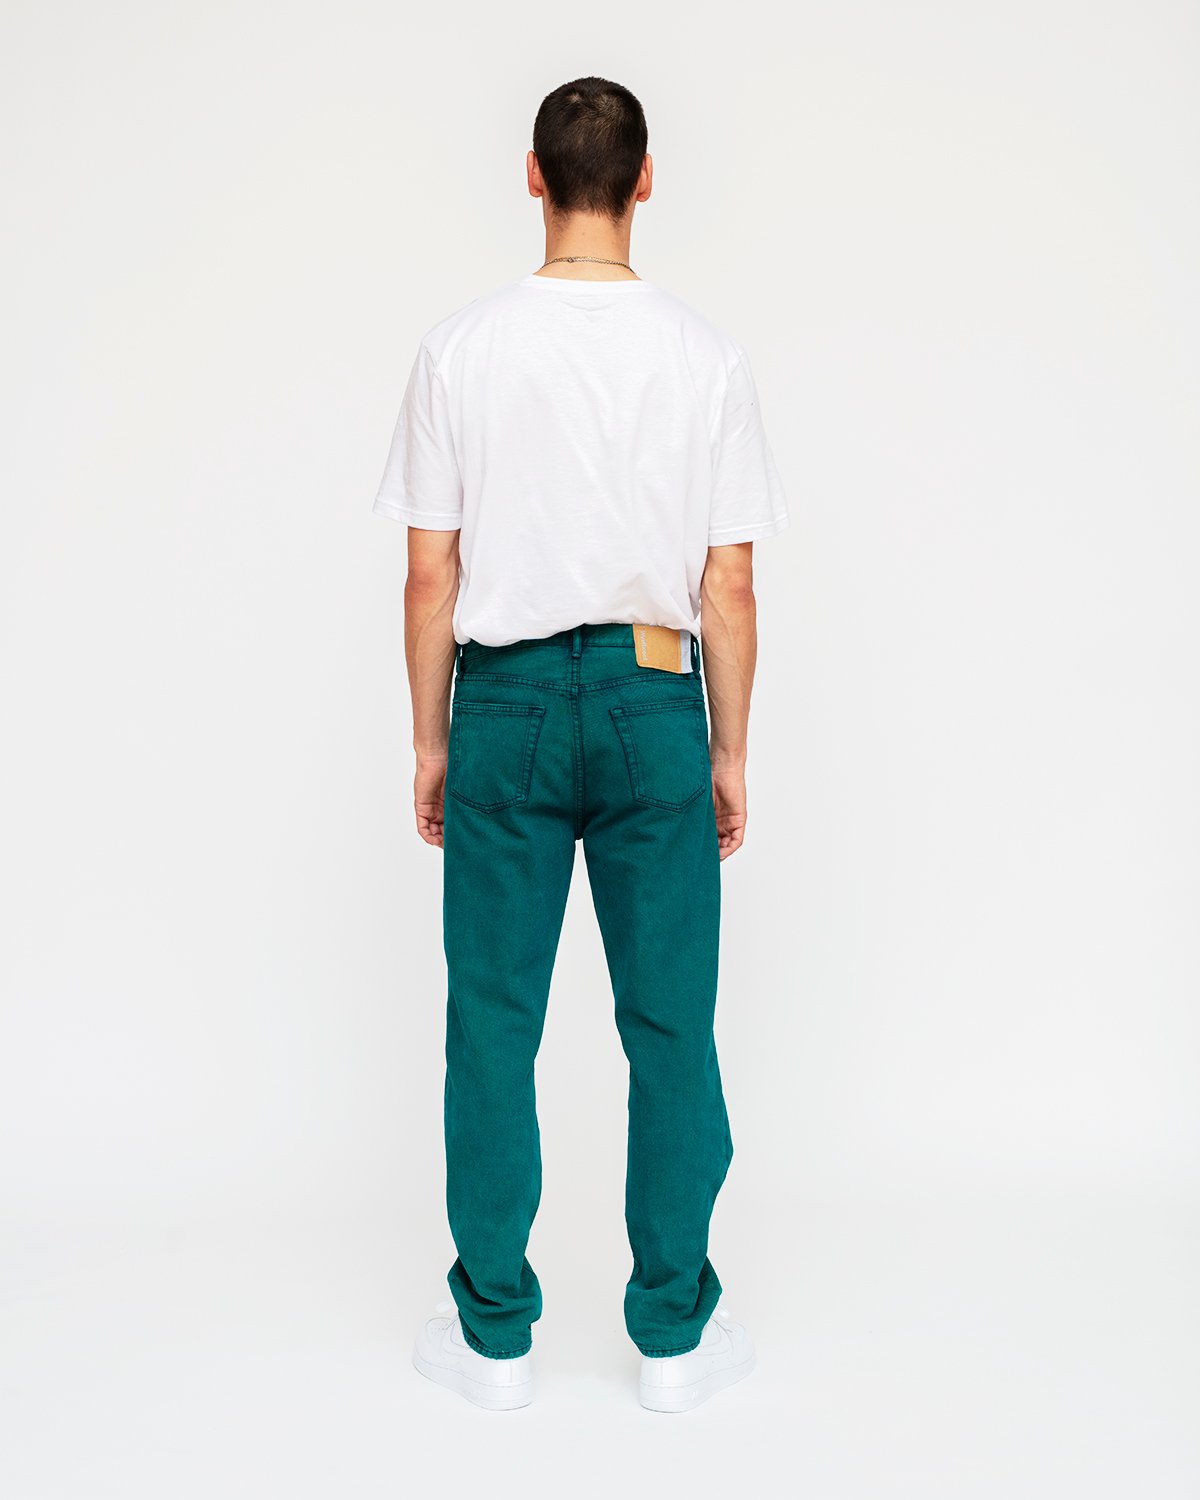 Acne Studios - Overdyed Jeans Jade Green - Clothing - Green - Image 6